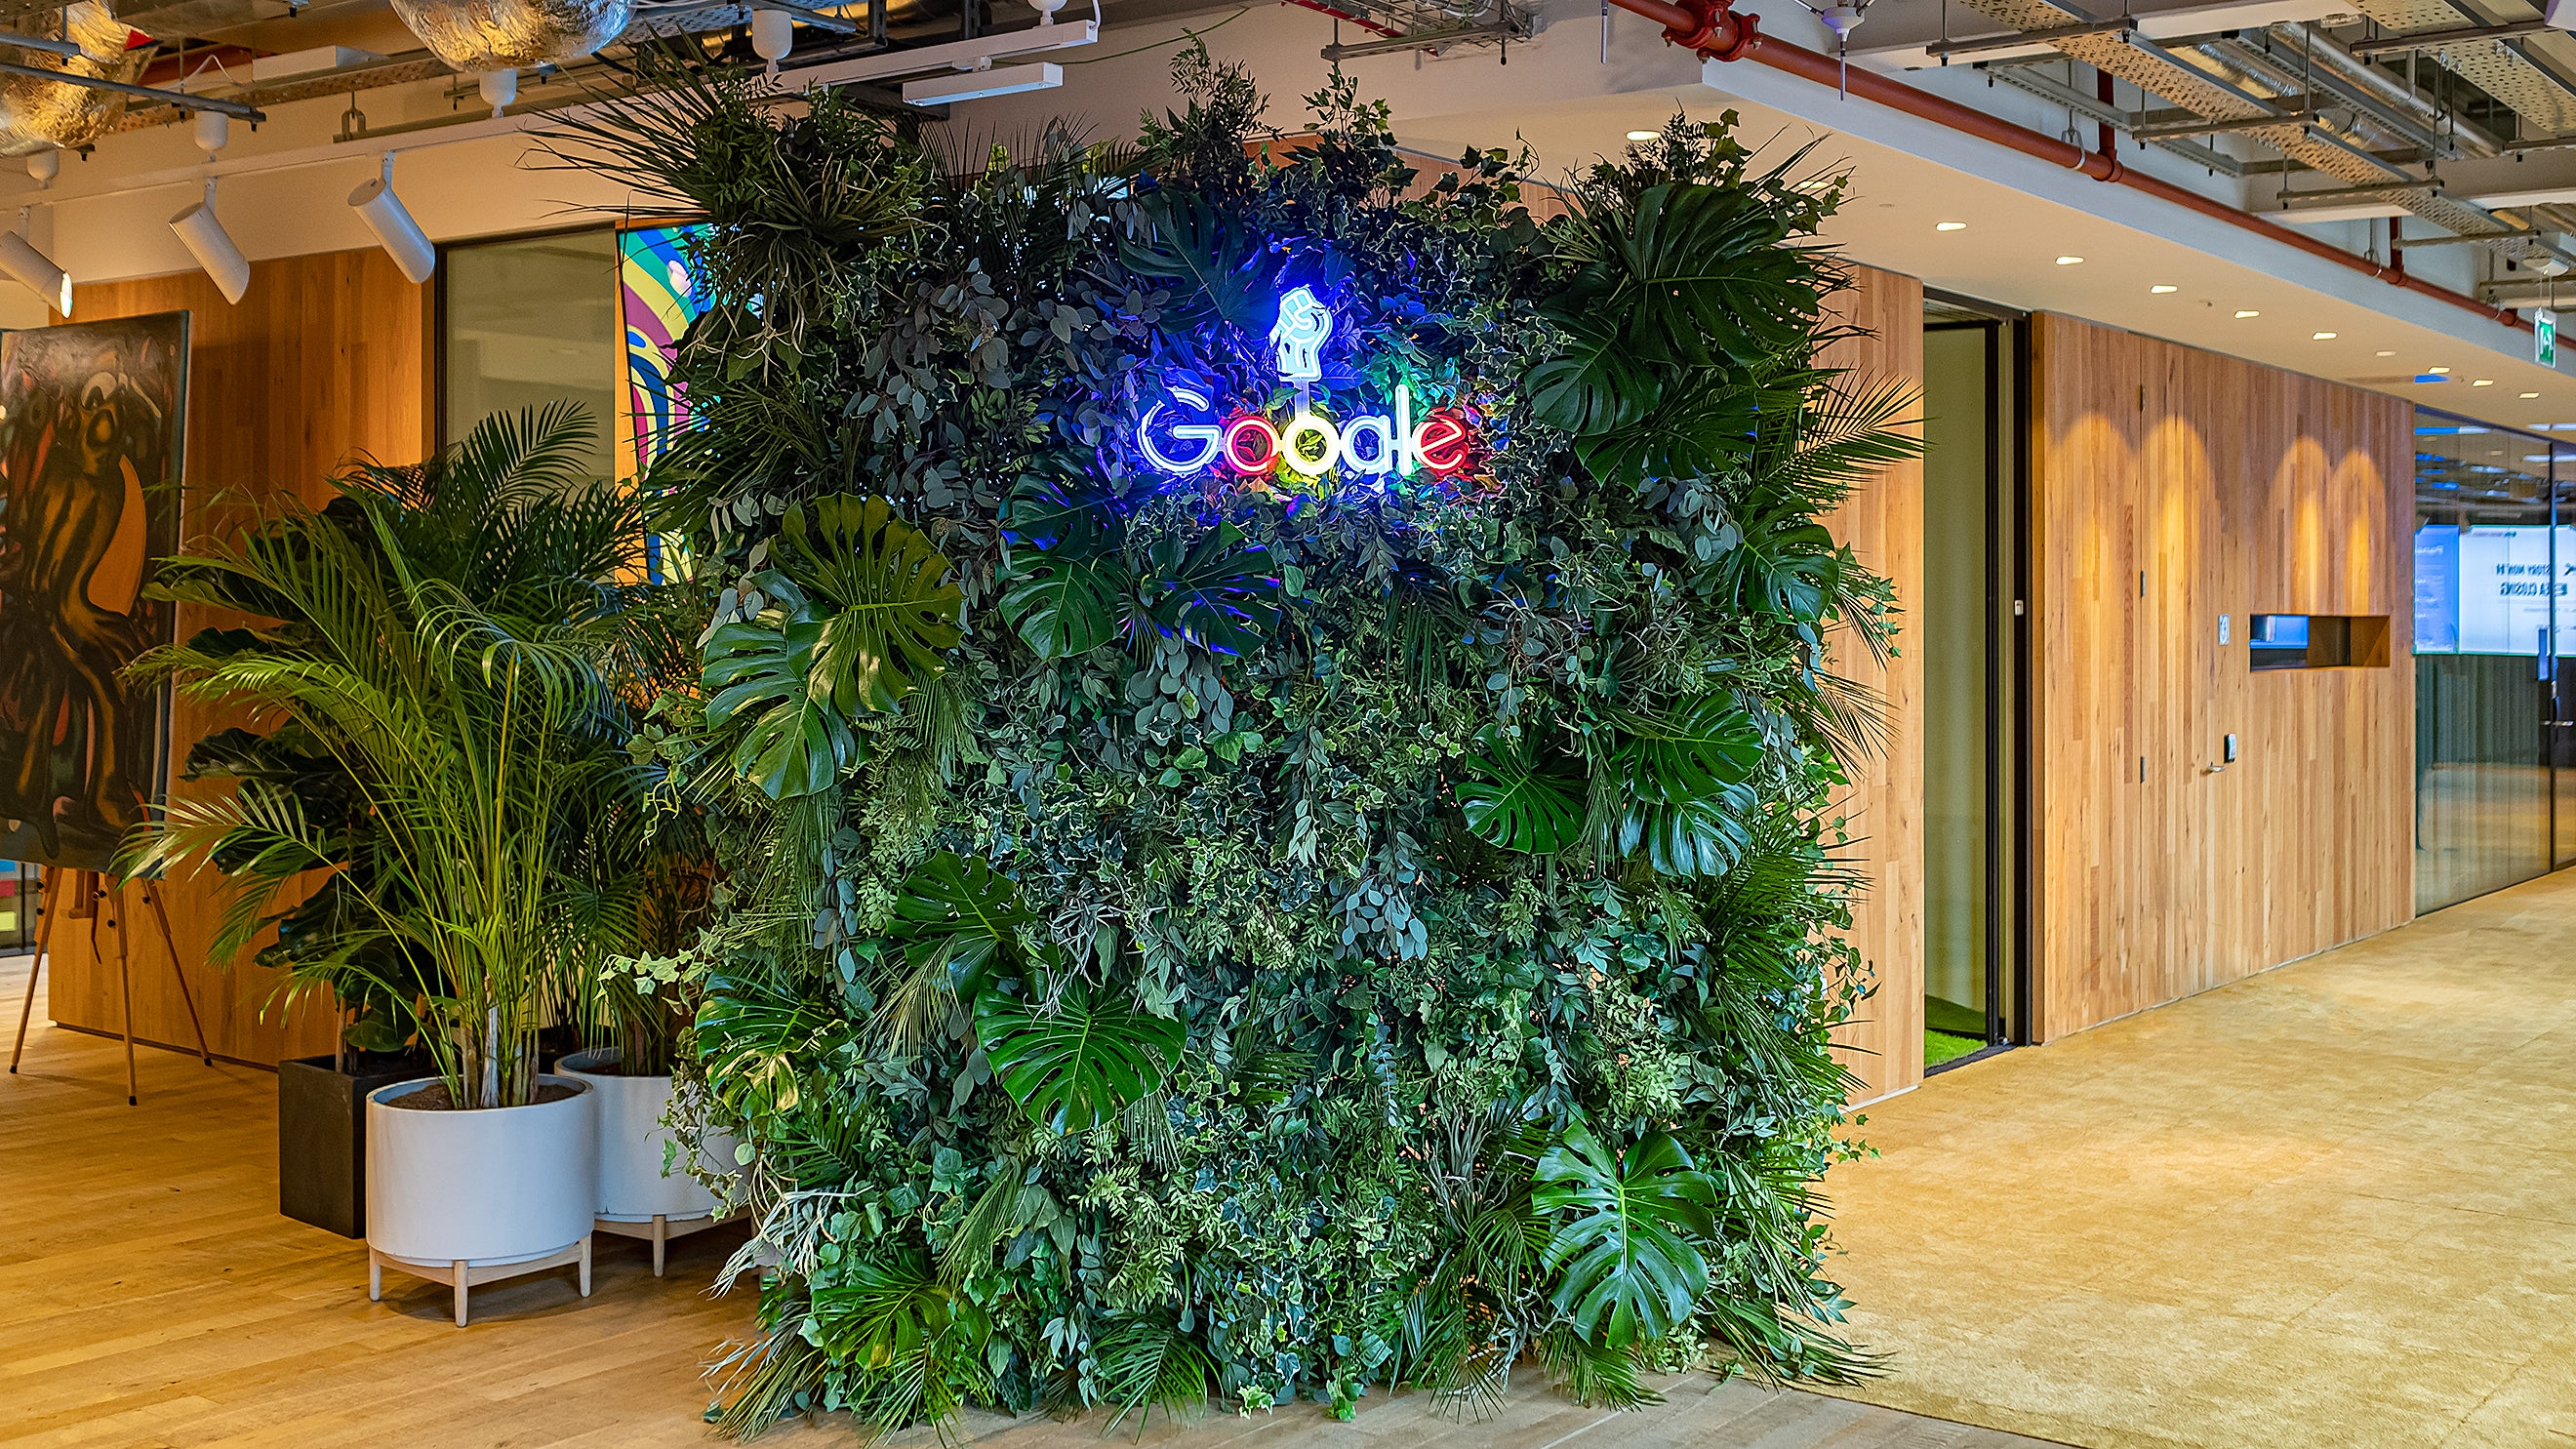 A flower wall created with sustainable forever flowers inspired by nature for client Google.